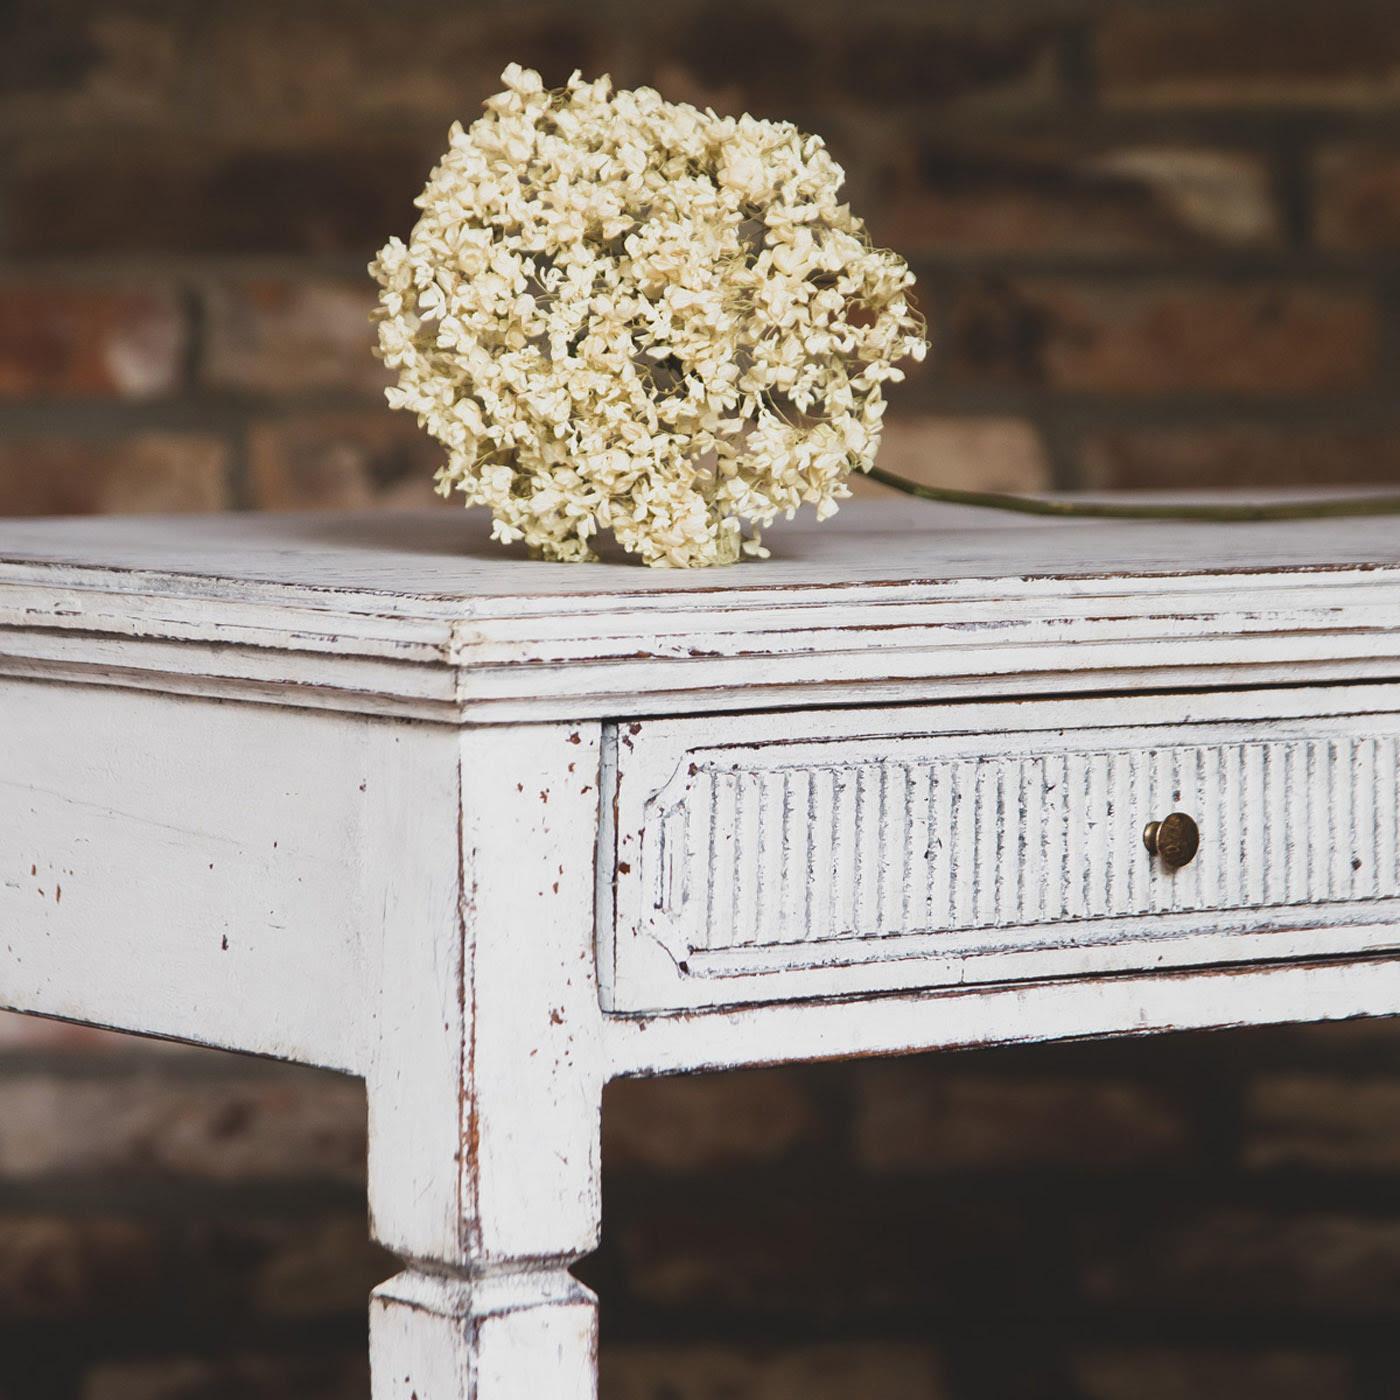 19th Century Swedish Antique Gustavian Console Table Desk Grey White Carved Detail 1850-1870 For Sale